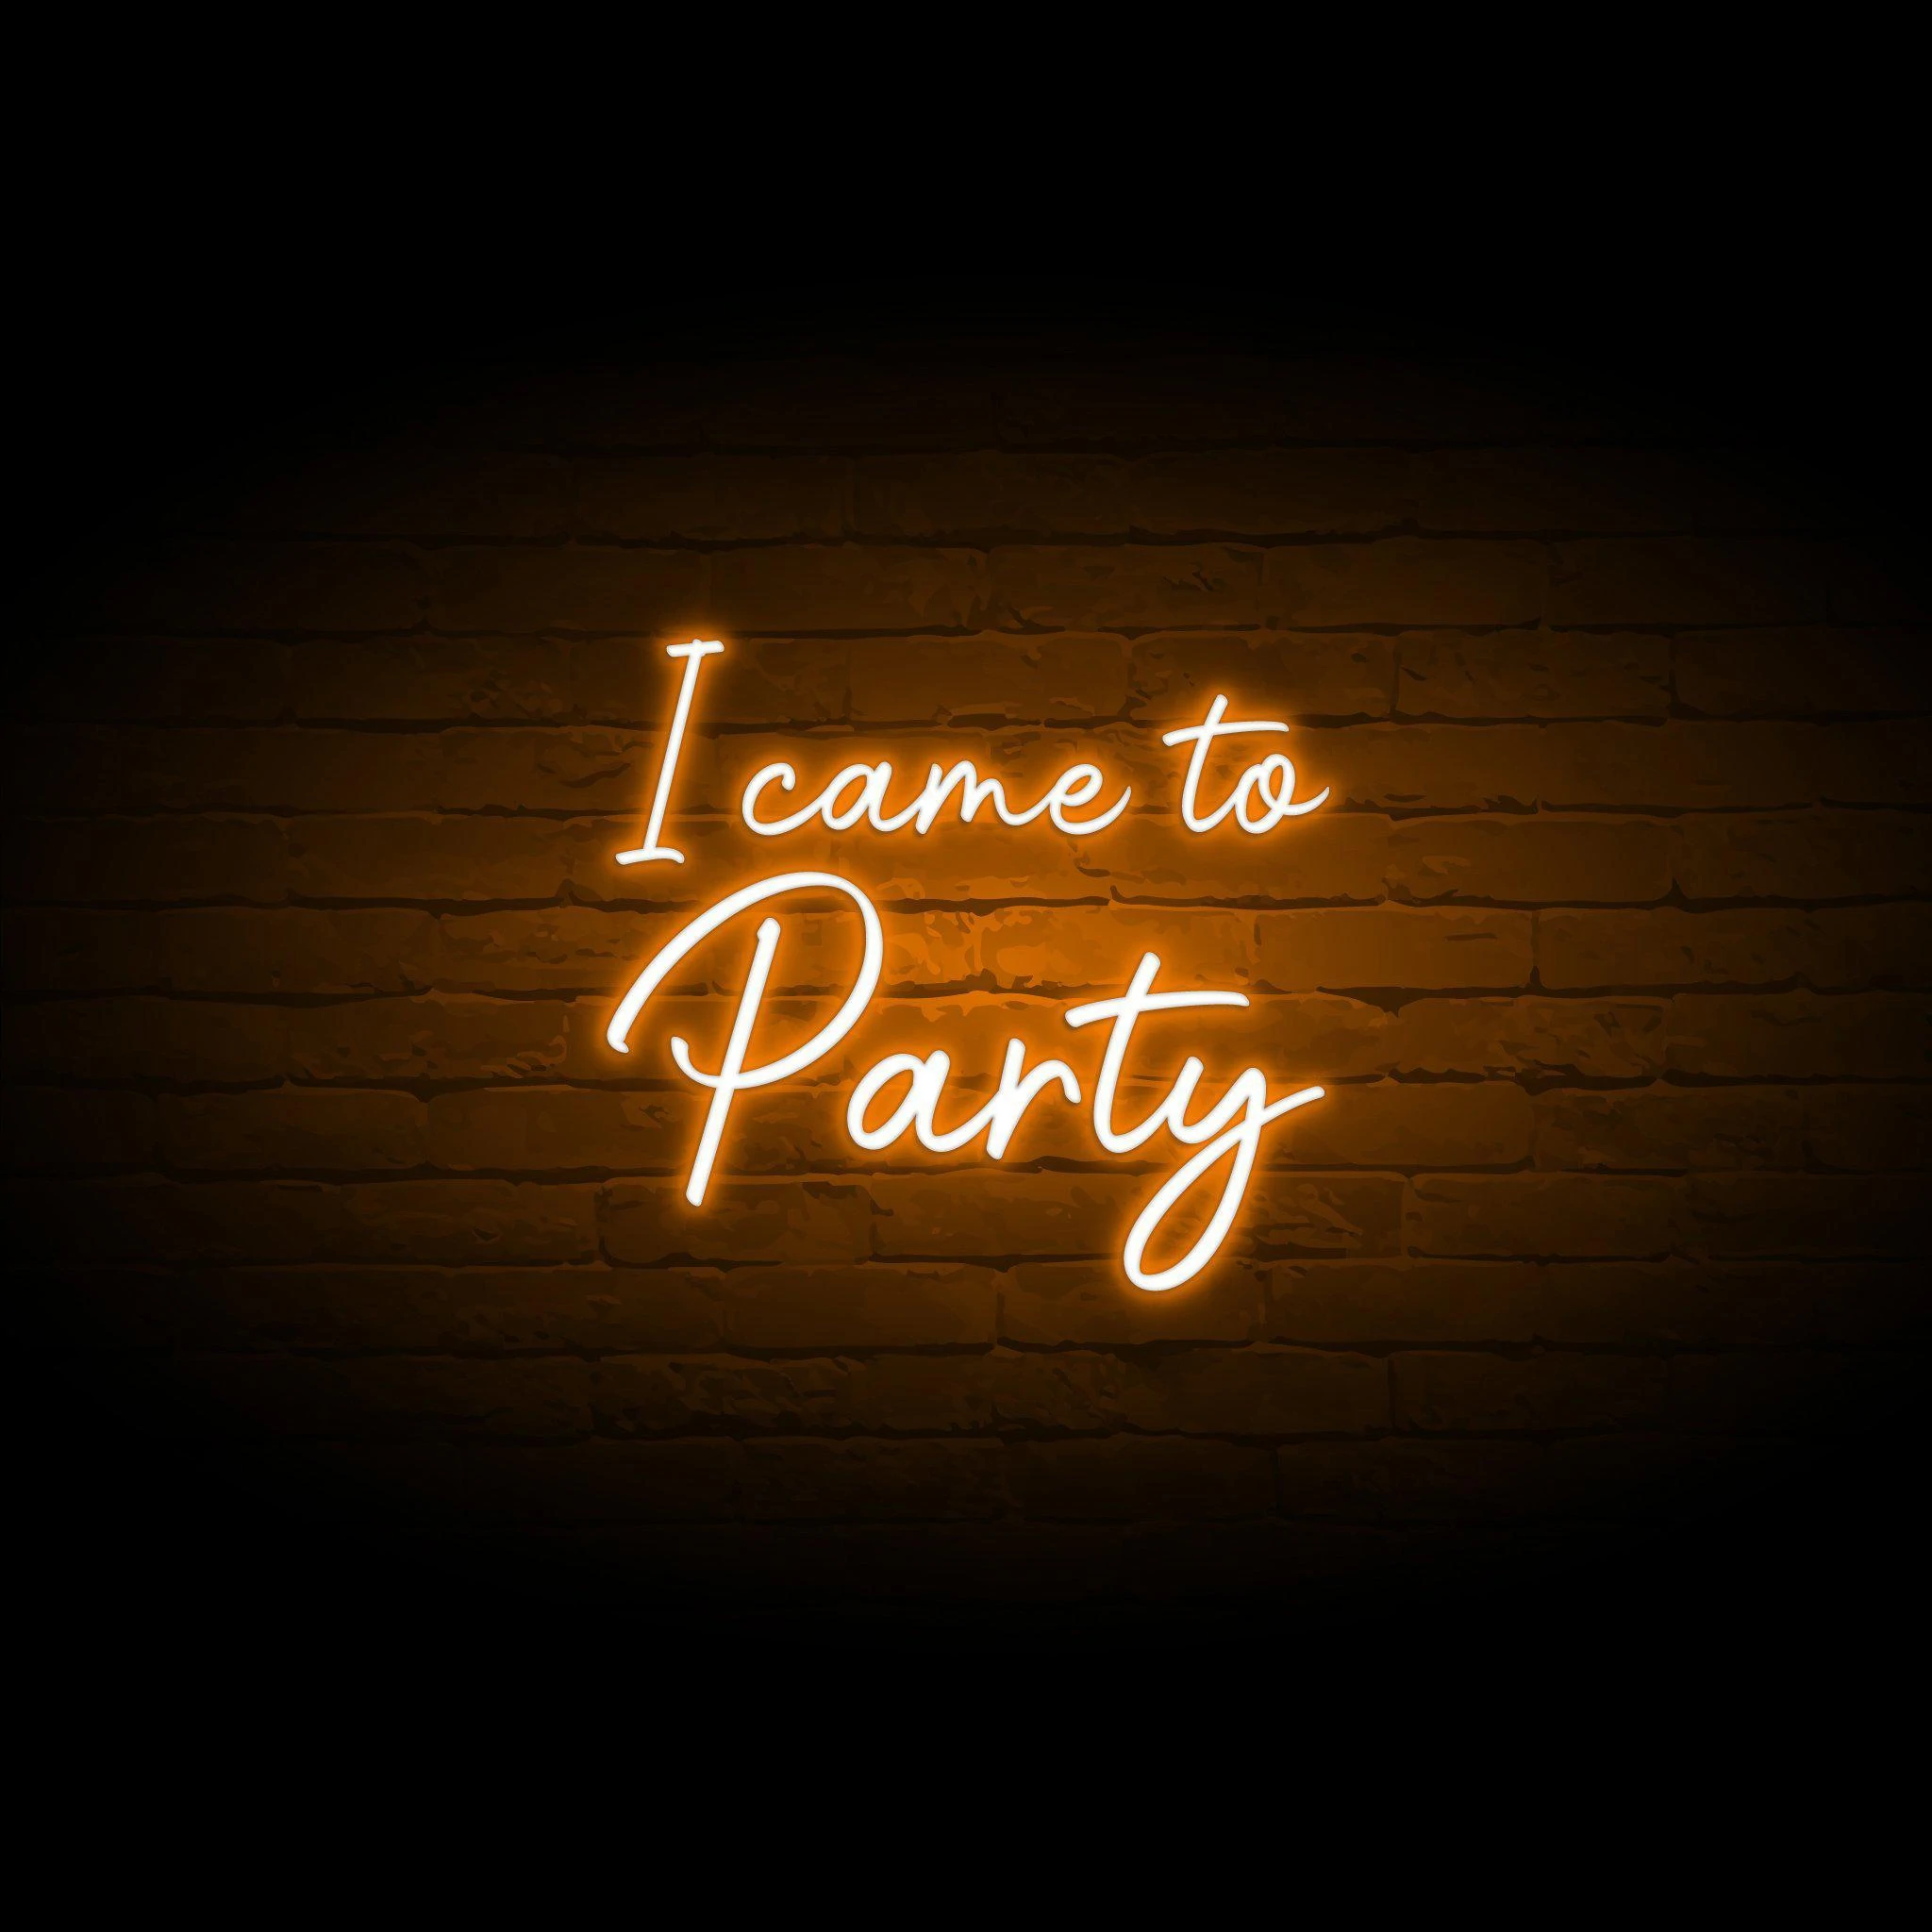 'I CAME TO PARTY' NEON SIGN